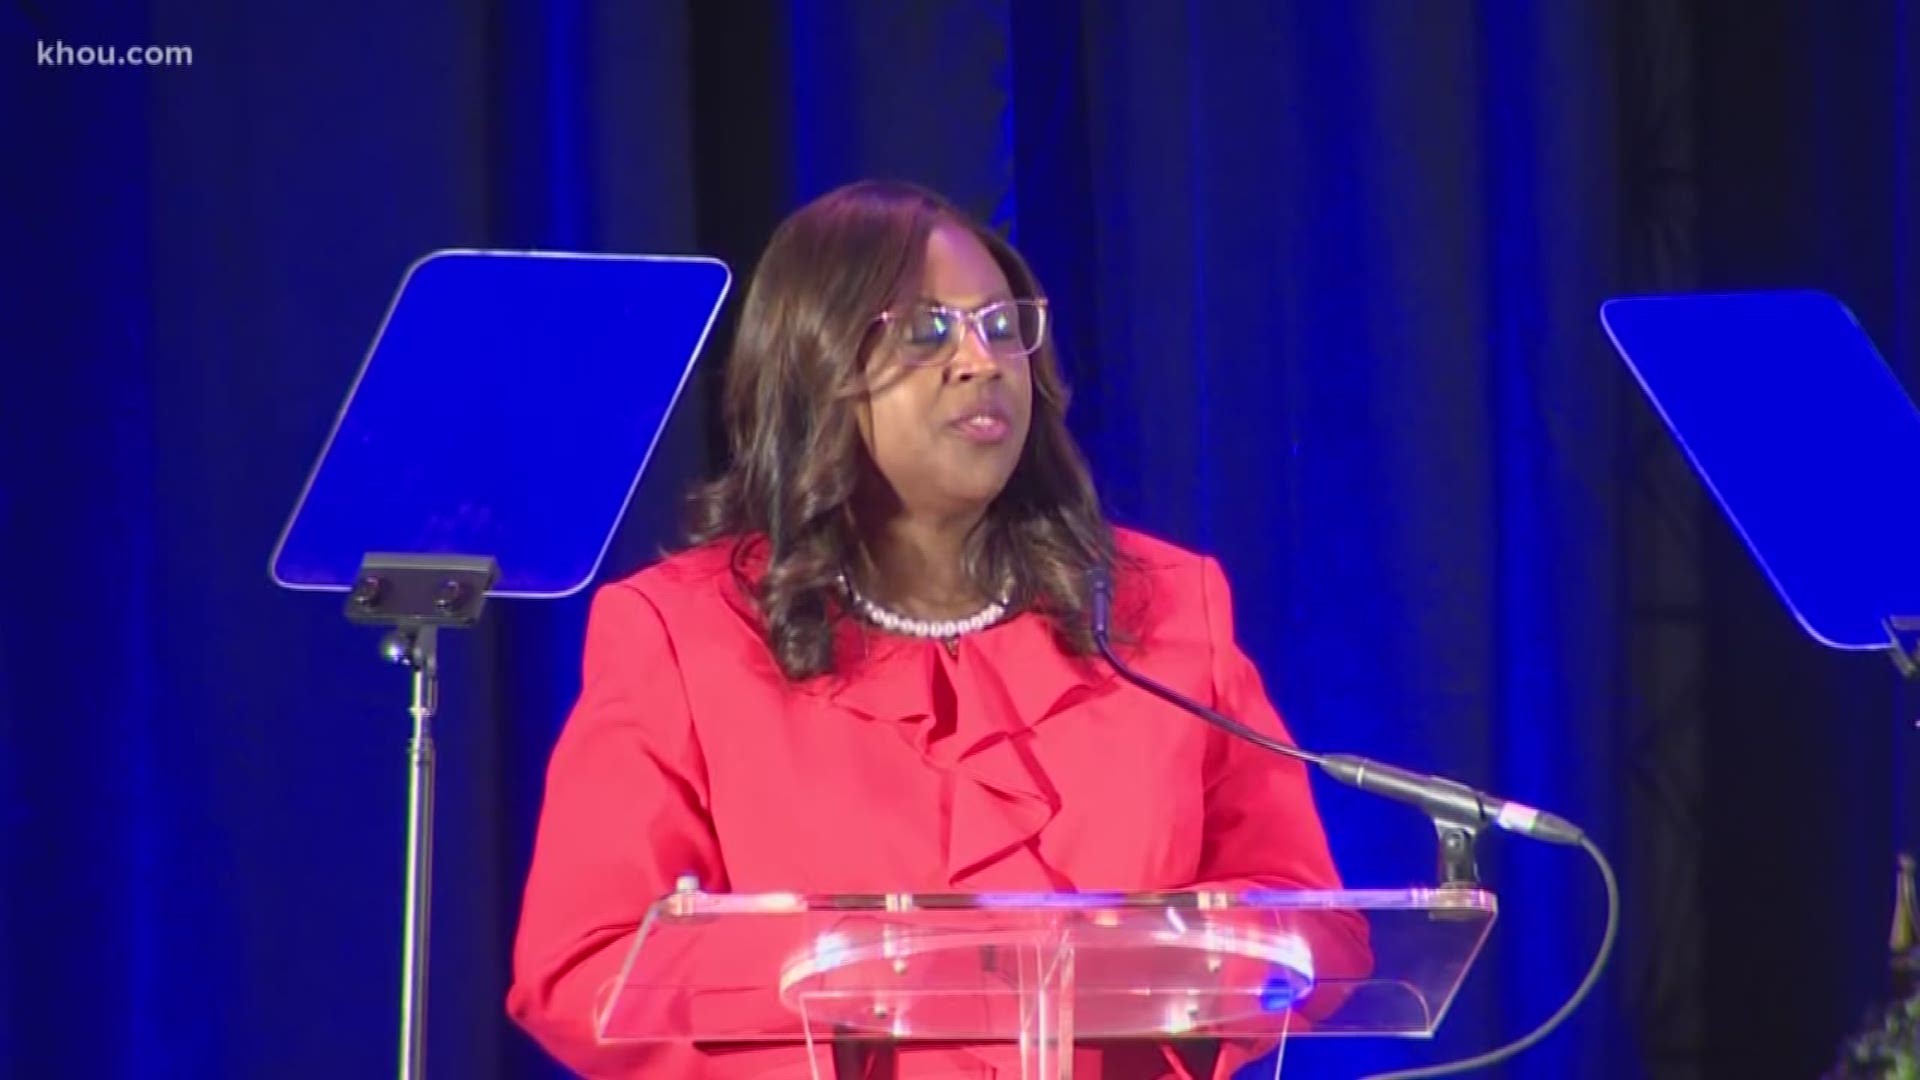 During the State of Houston ISD address, interim superintendent Grenita Lathan discussed some of the challenges the district faces.